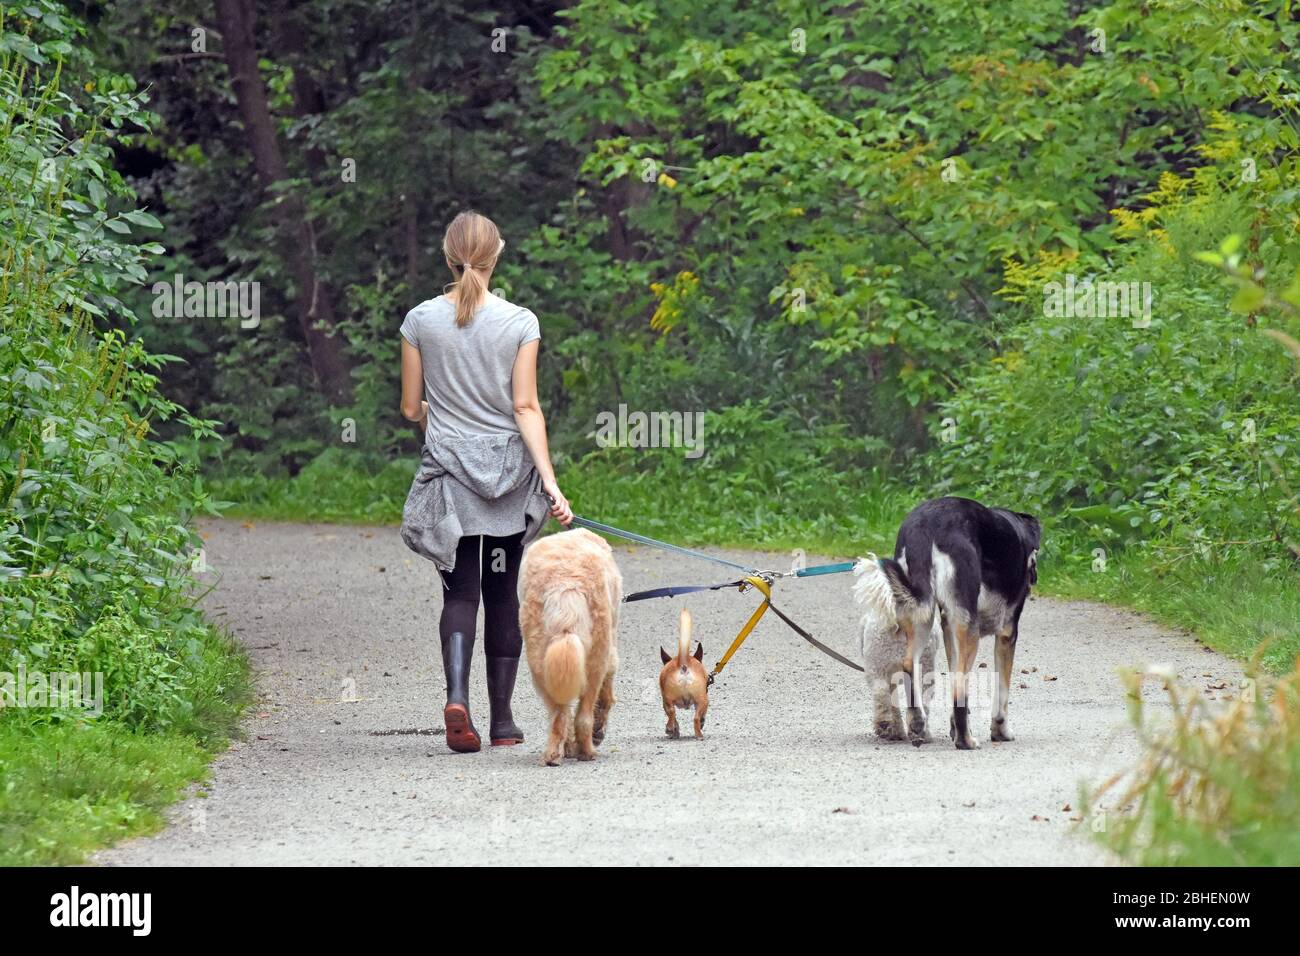 Dog walker woman with dogs while walking outdoors Stock Photo